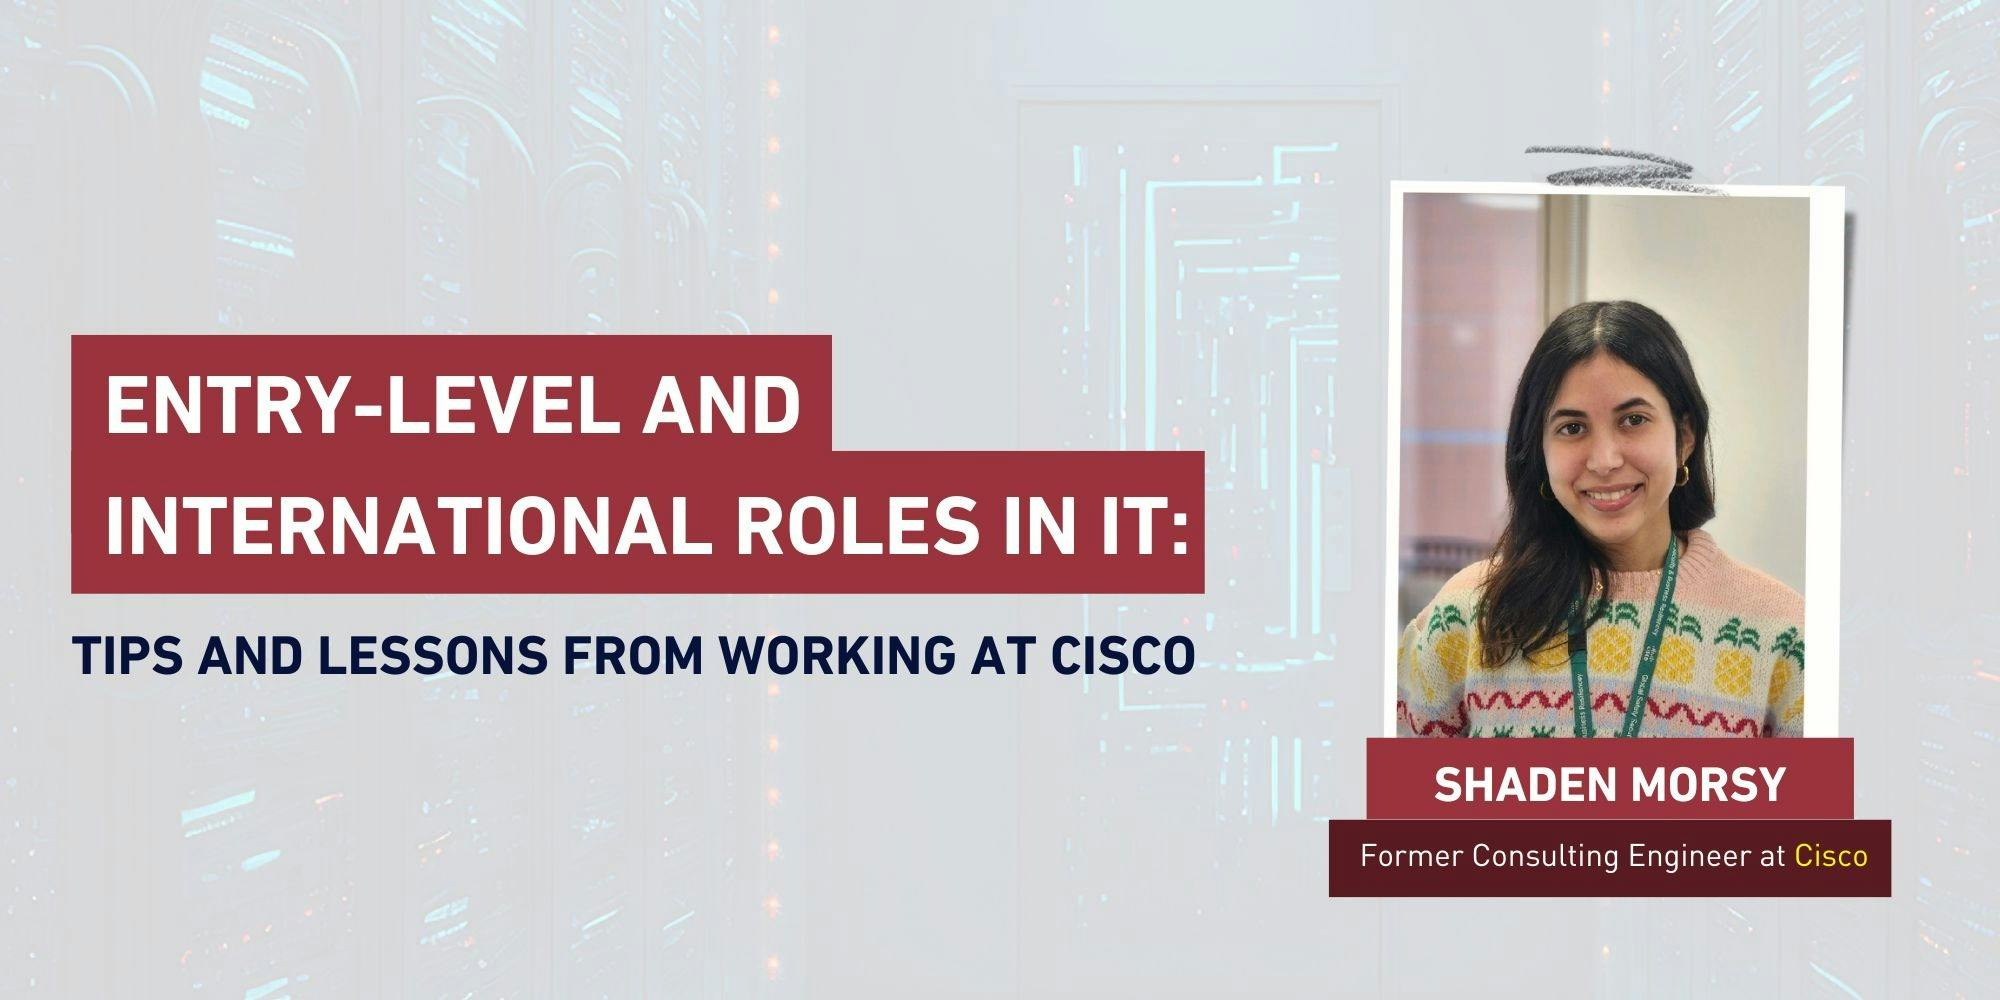 Entry-Level and International Roles in IT: Tips and Lessons From Working at Cisco